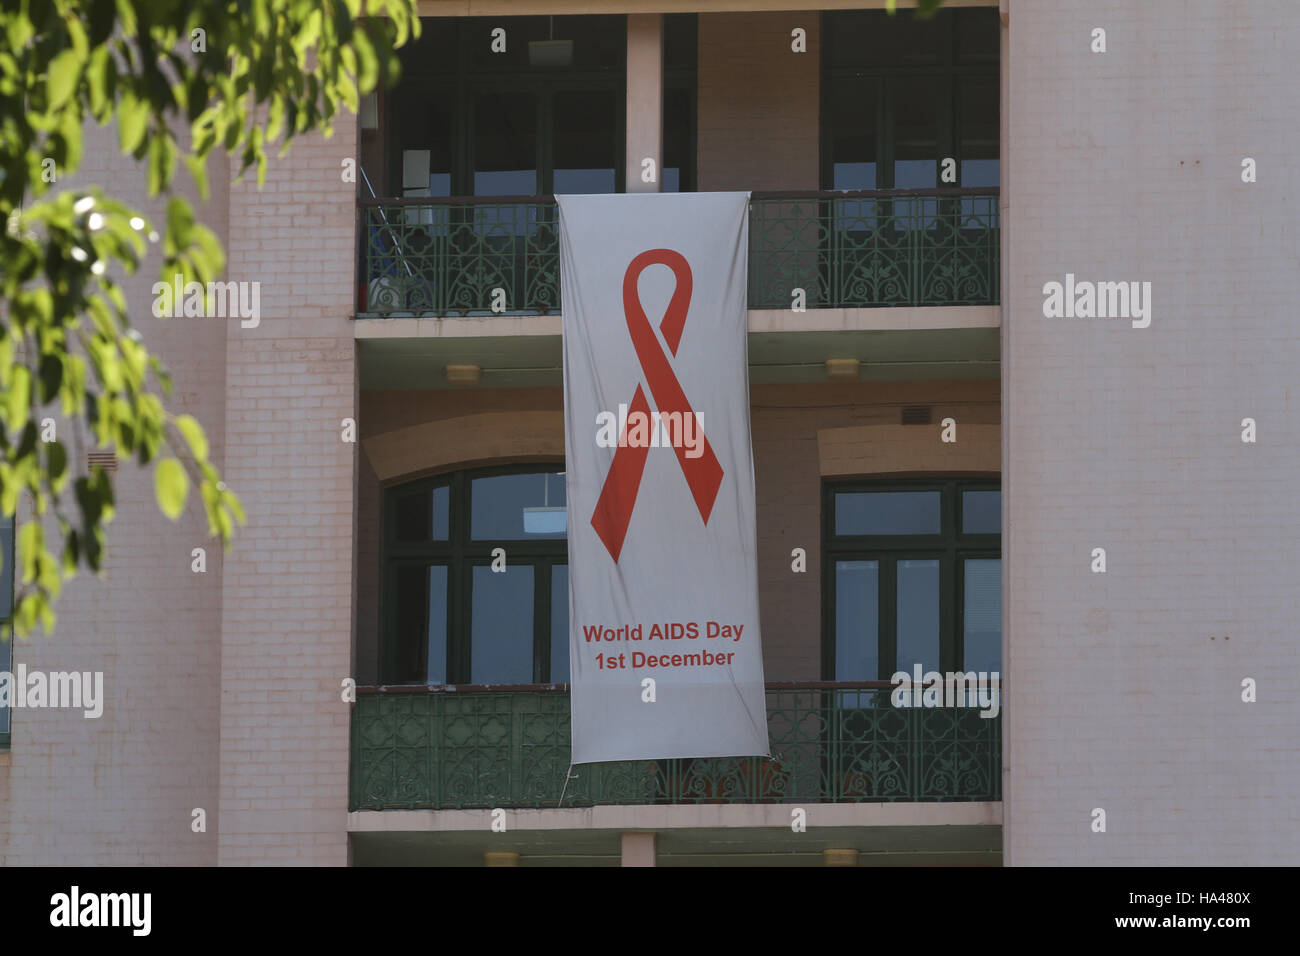 Sydney, Australia. 26 November 2016. Sydney Hospital promotes World AIDS Day, which is on 1 December each year. World AIDS Day raises awareness around Stock Photo